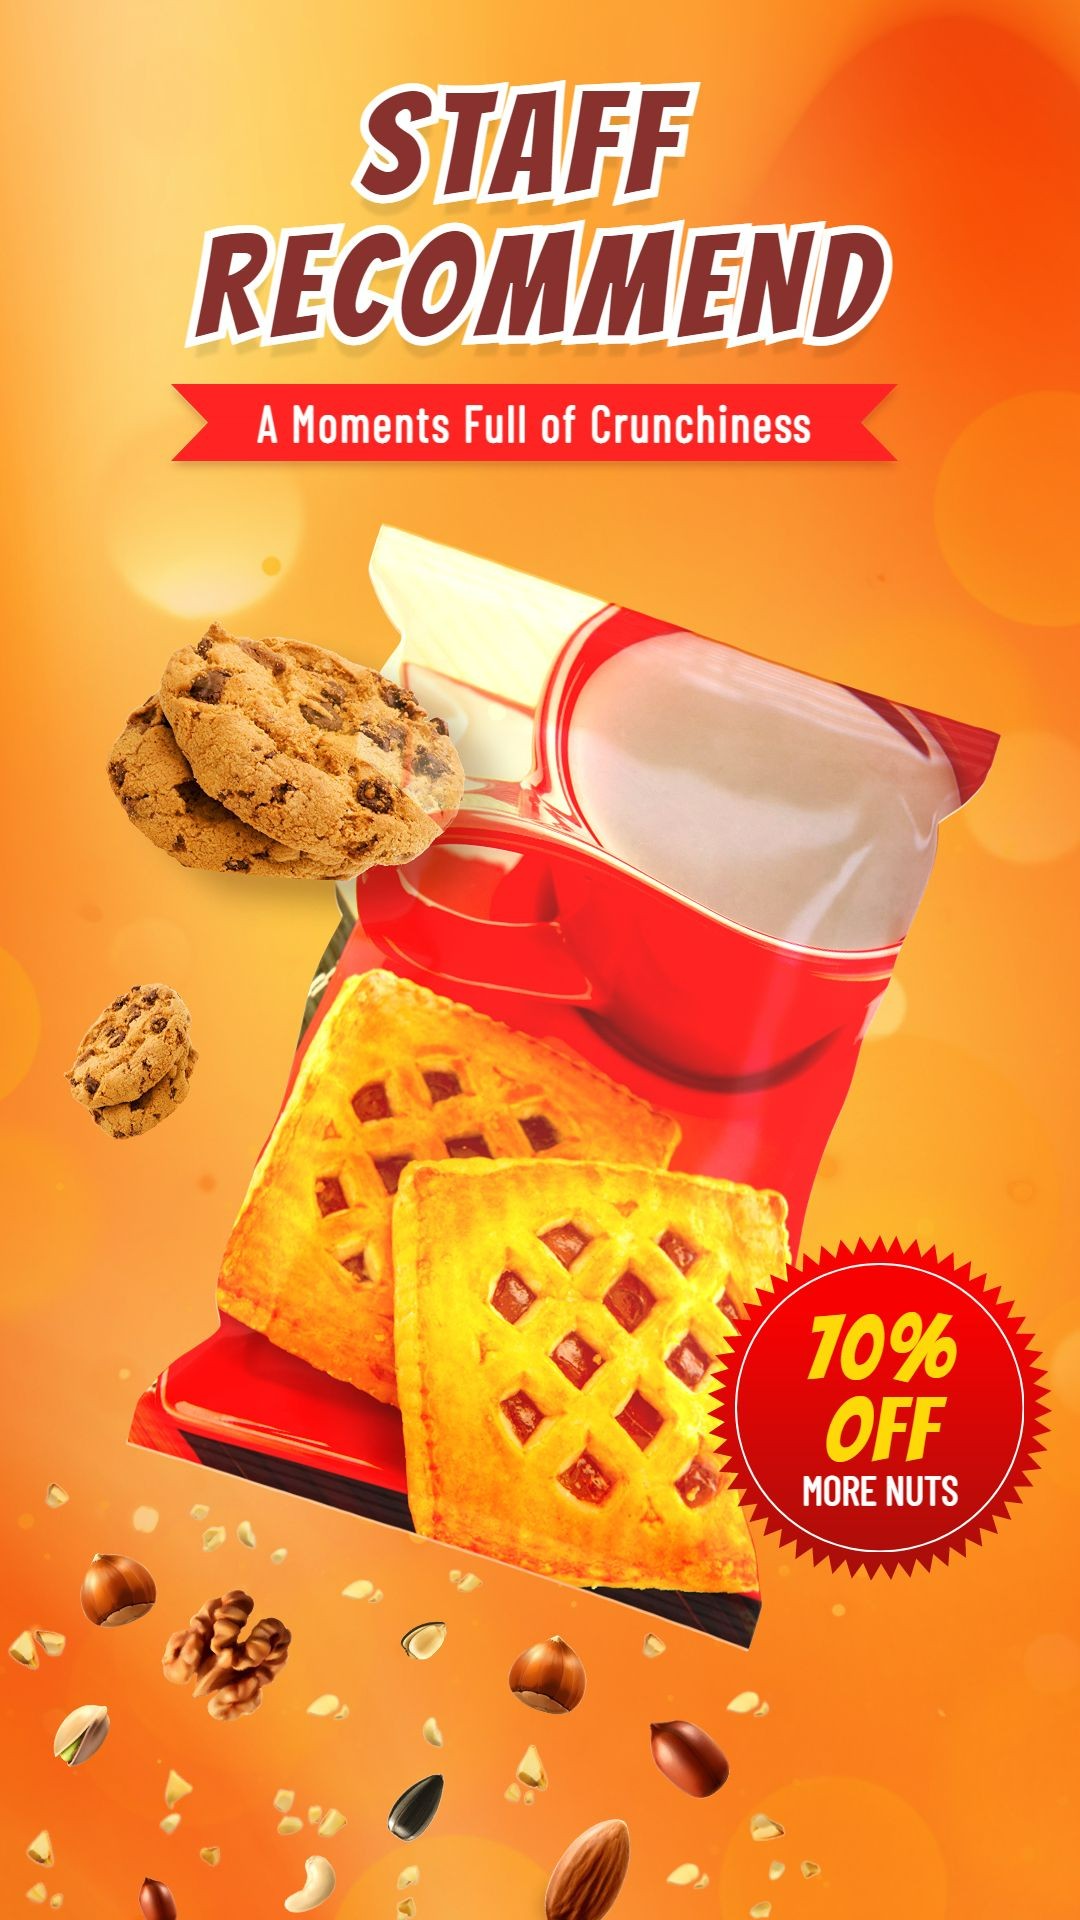 Crunchy Cookies Snacks Consumer Packaged Food Groceries Product Promo Discount Sale Ecommerce Story